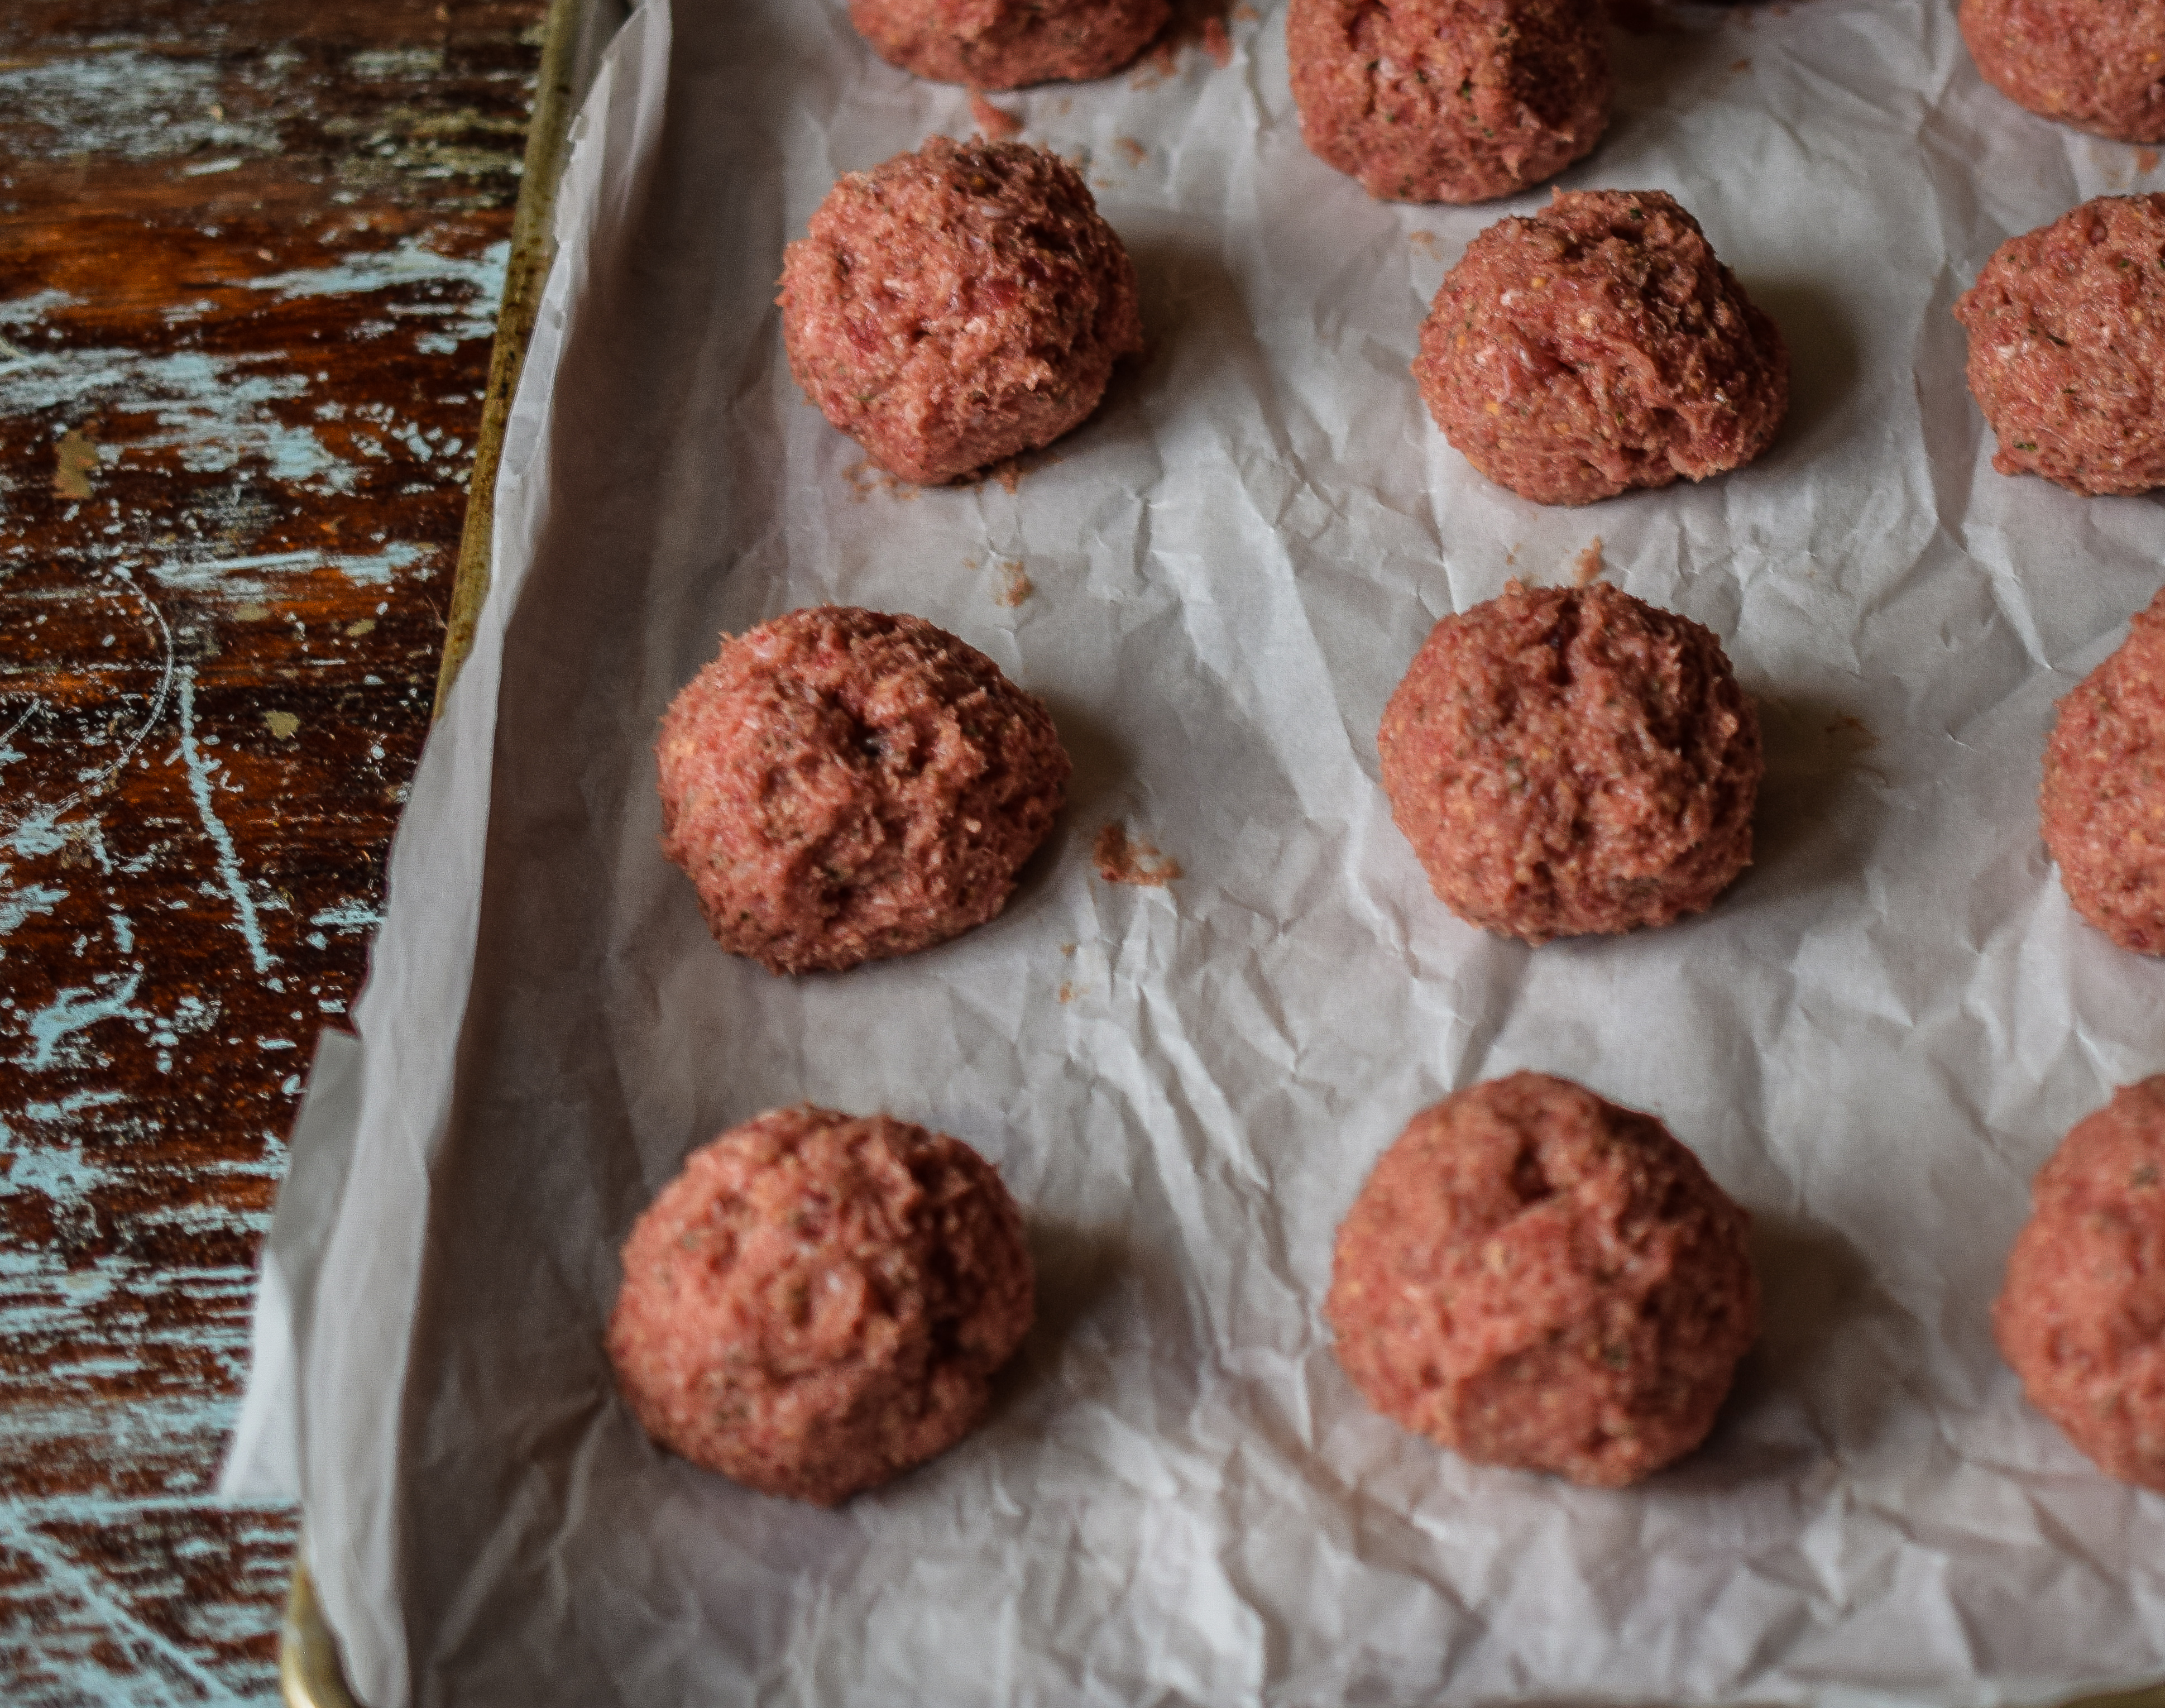 Balls of ground beef shaped into balls on a baking sheet.